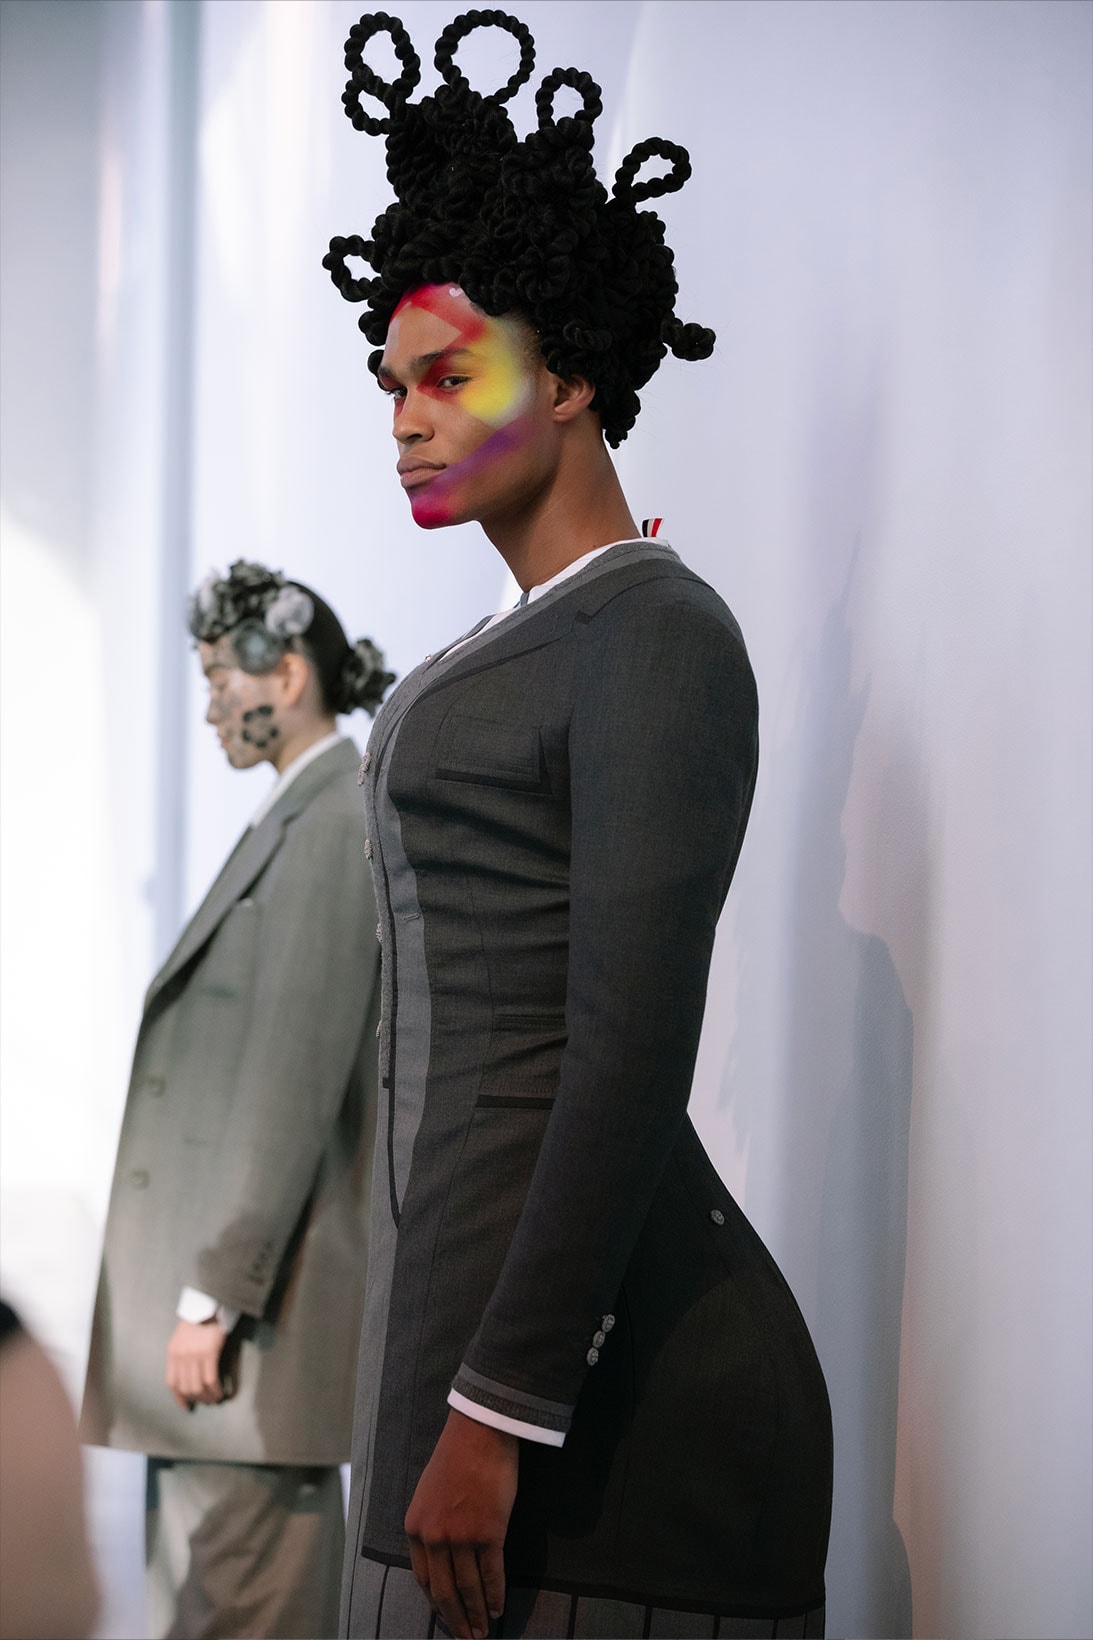 Thom Browne NYFW Spring/Summer 2022 SS22 Backstage Hair Makeup Suit Dress